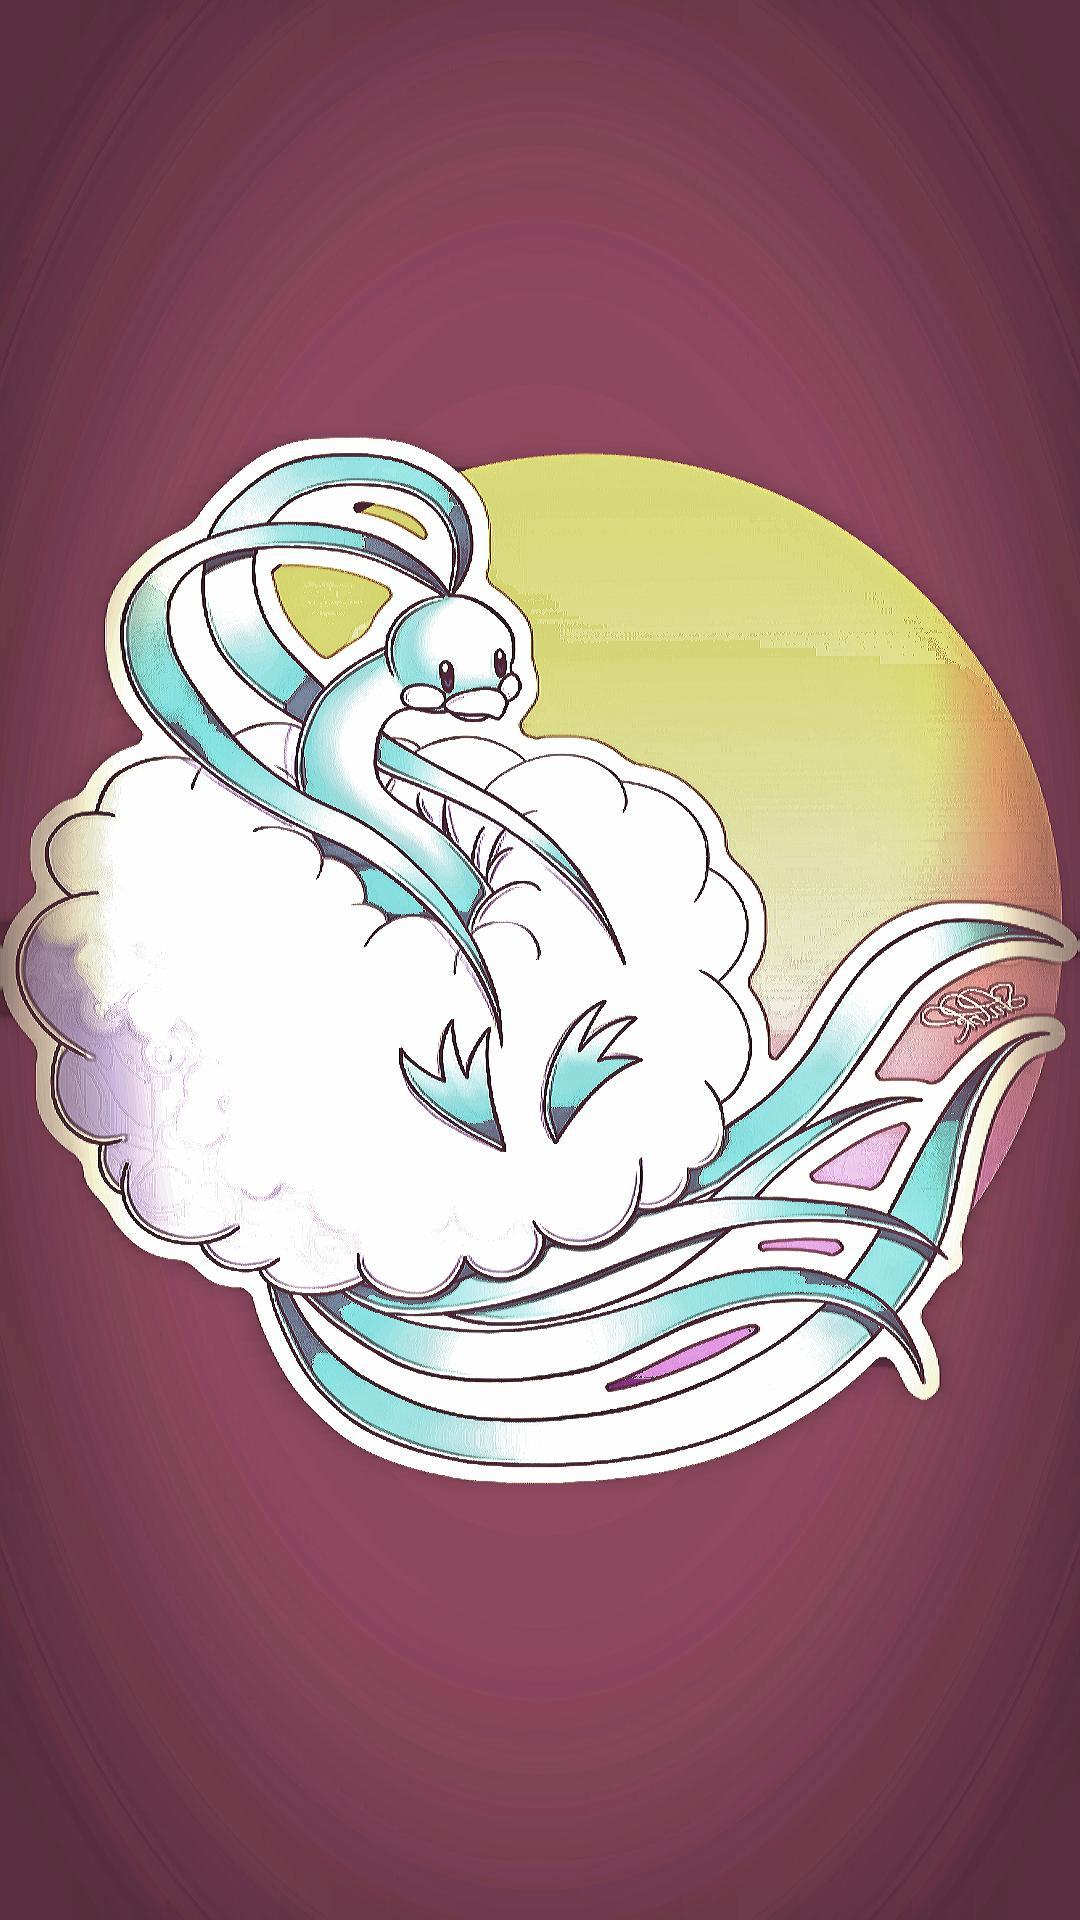 An edit of Altaria for a phone wallpaper, requested